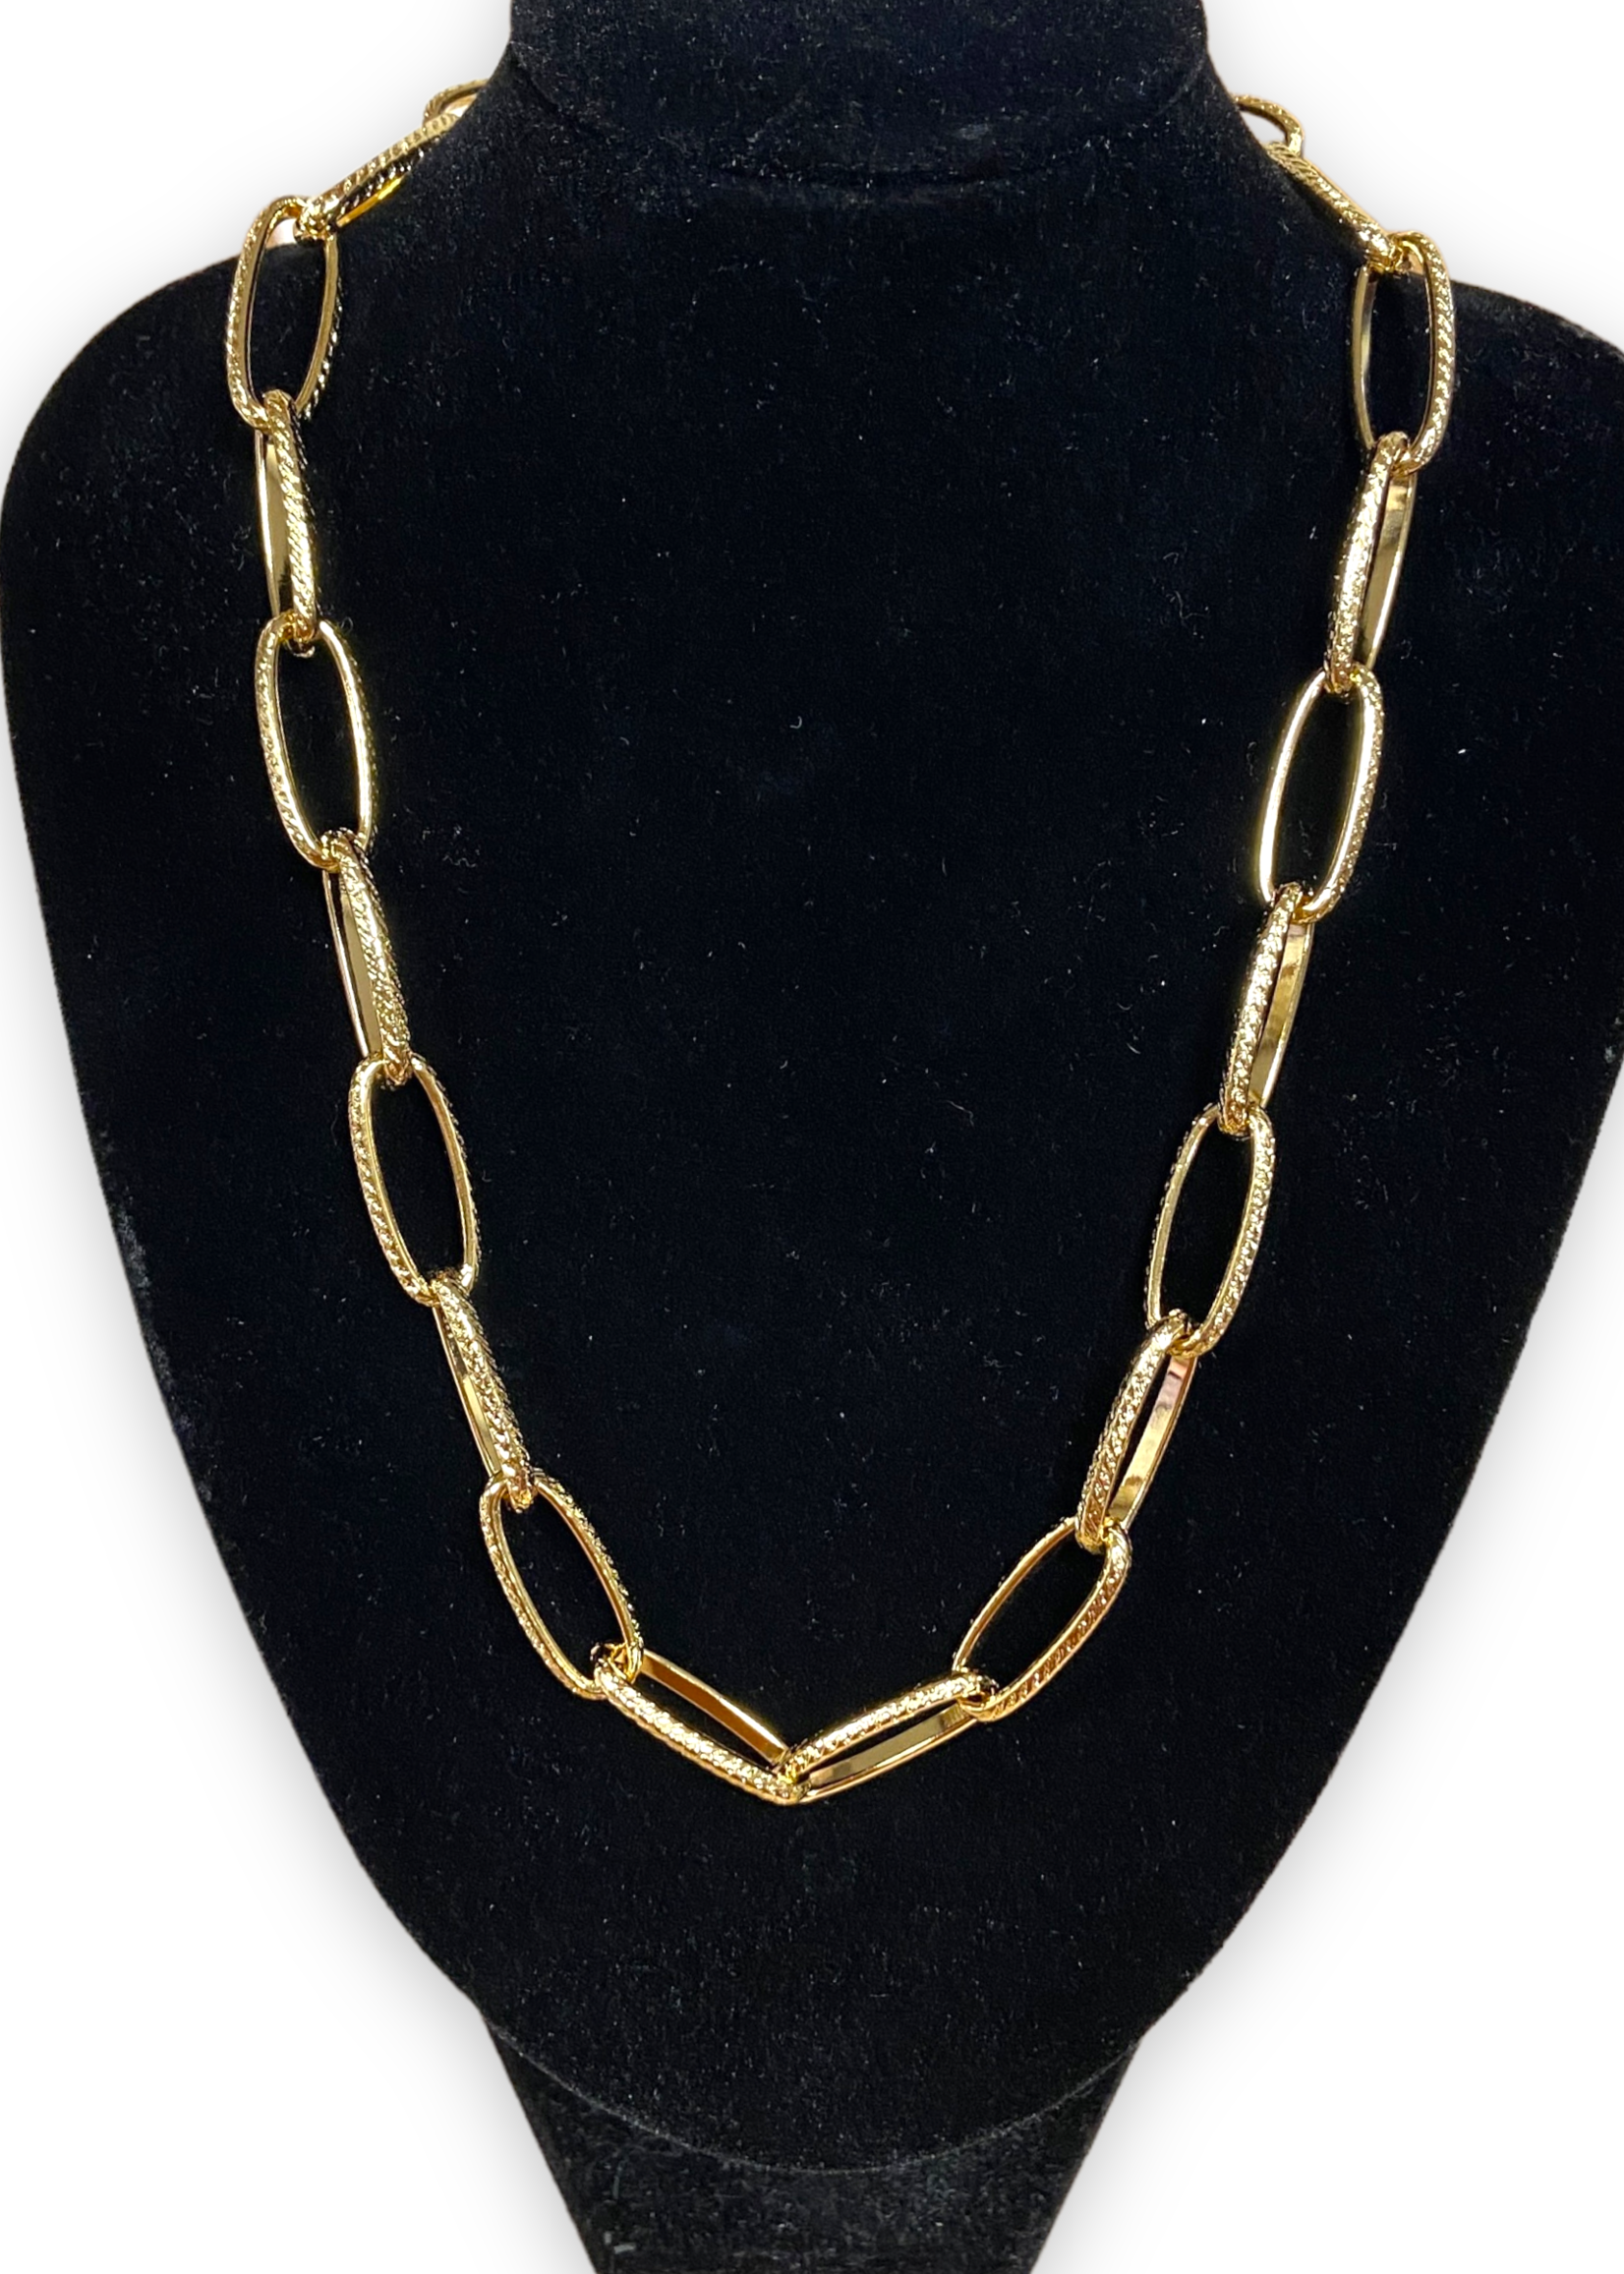 JDB Textured Oval Chain Link Necklace